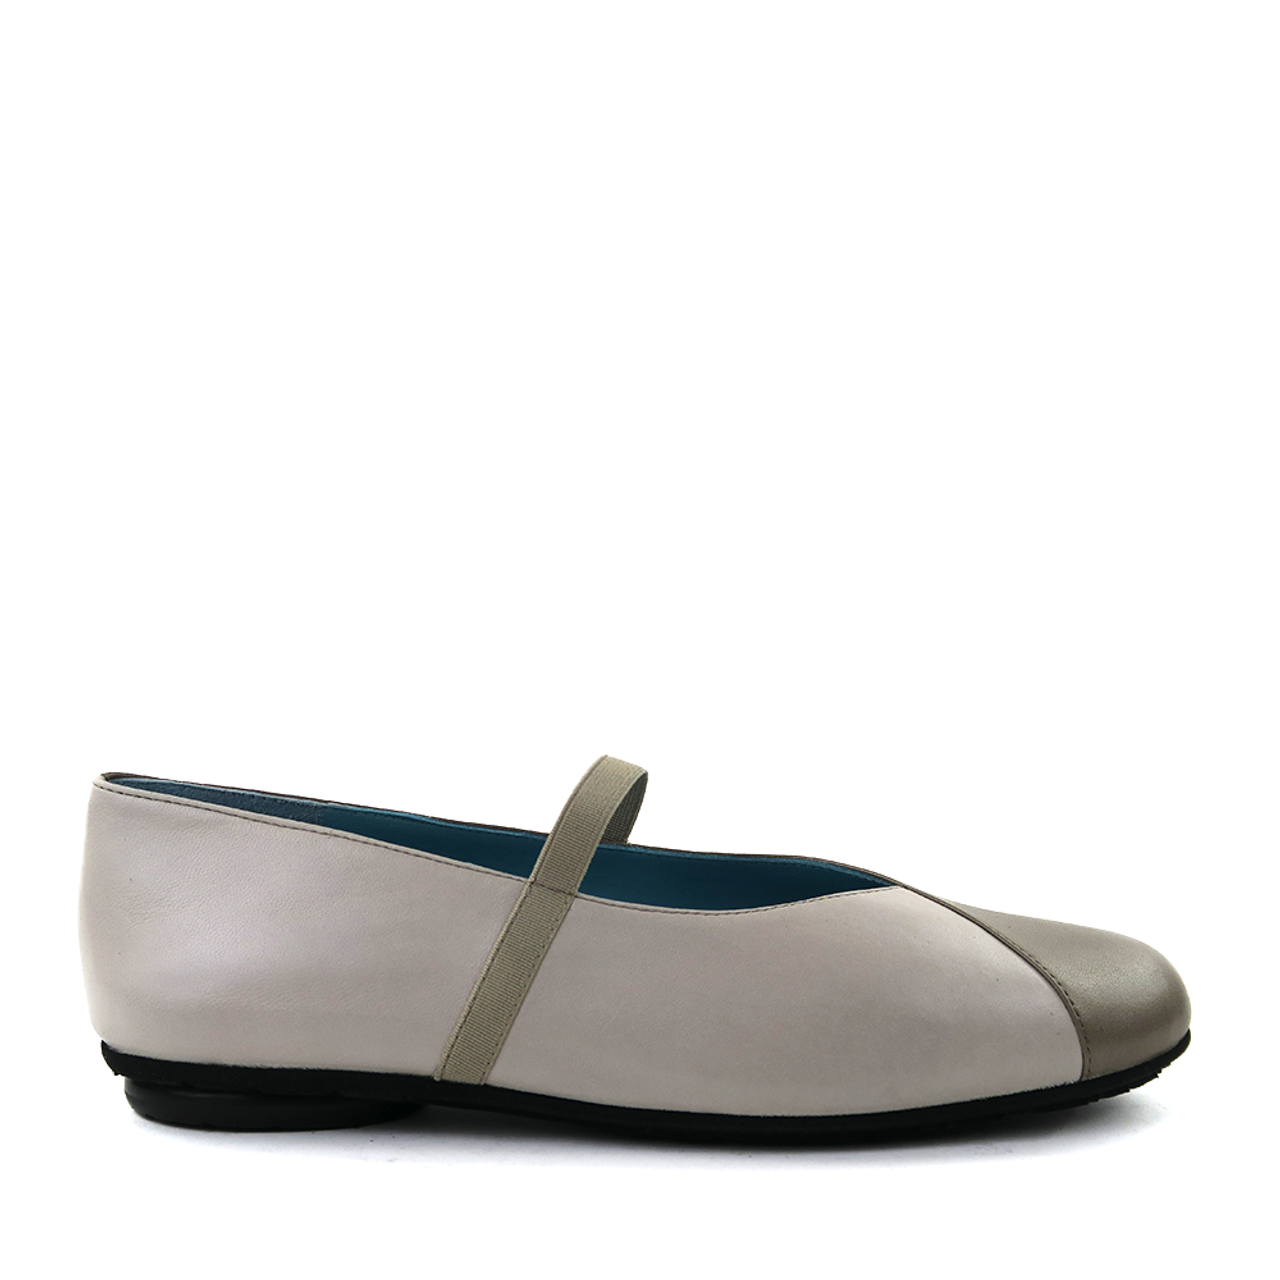 Thierry Rabotin Shoes and Sandals on Sale | Hanig's Footwear